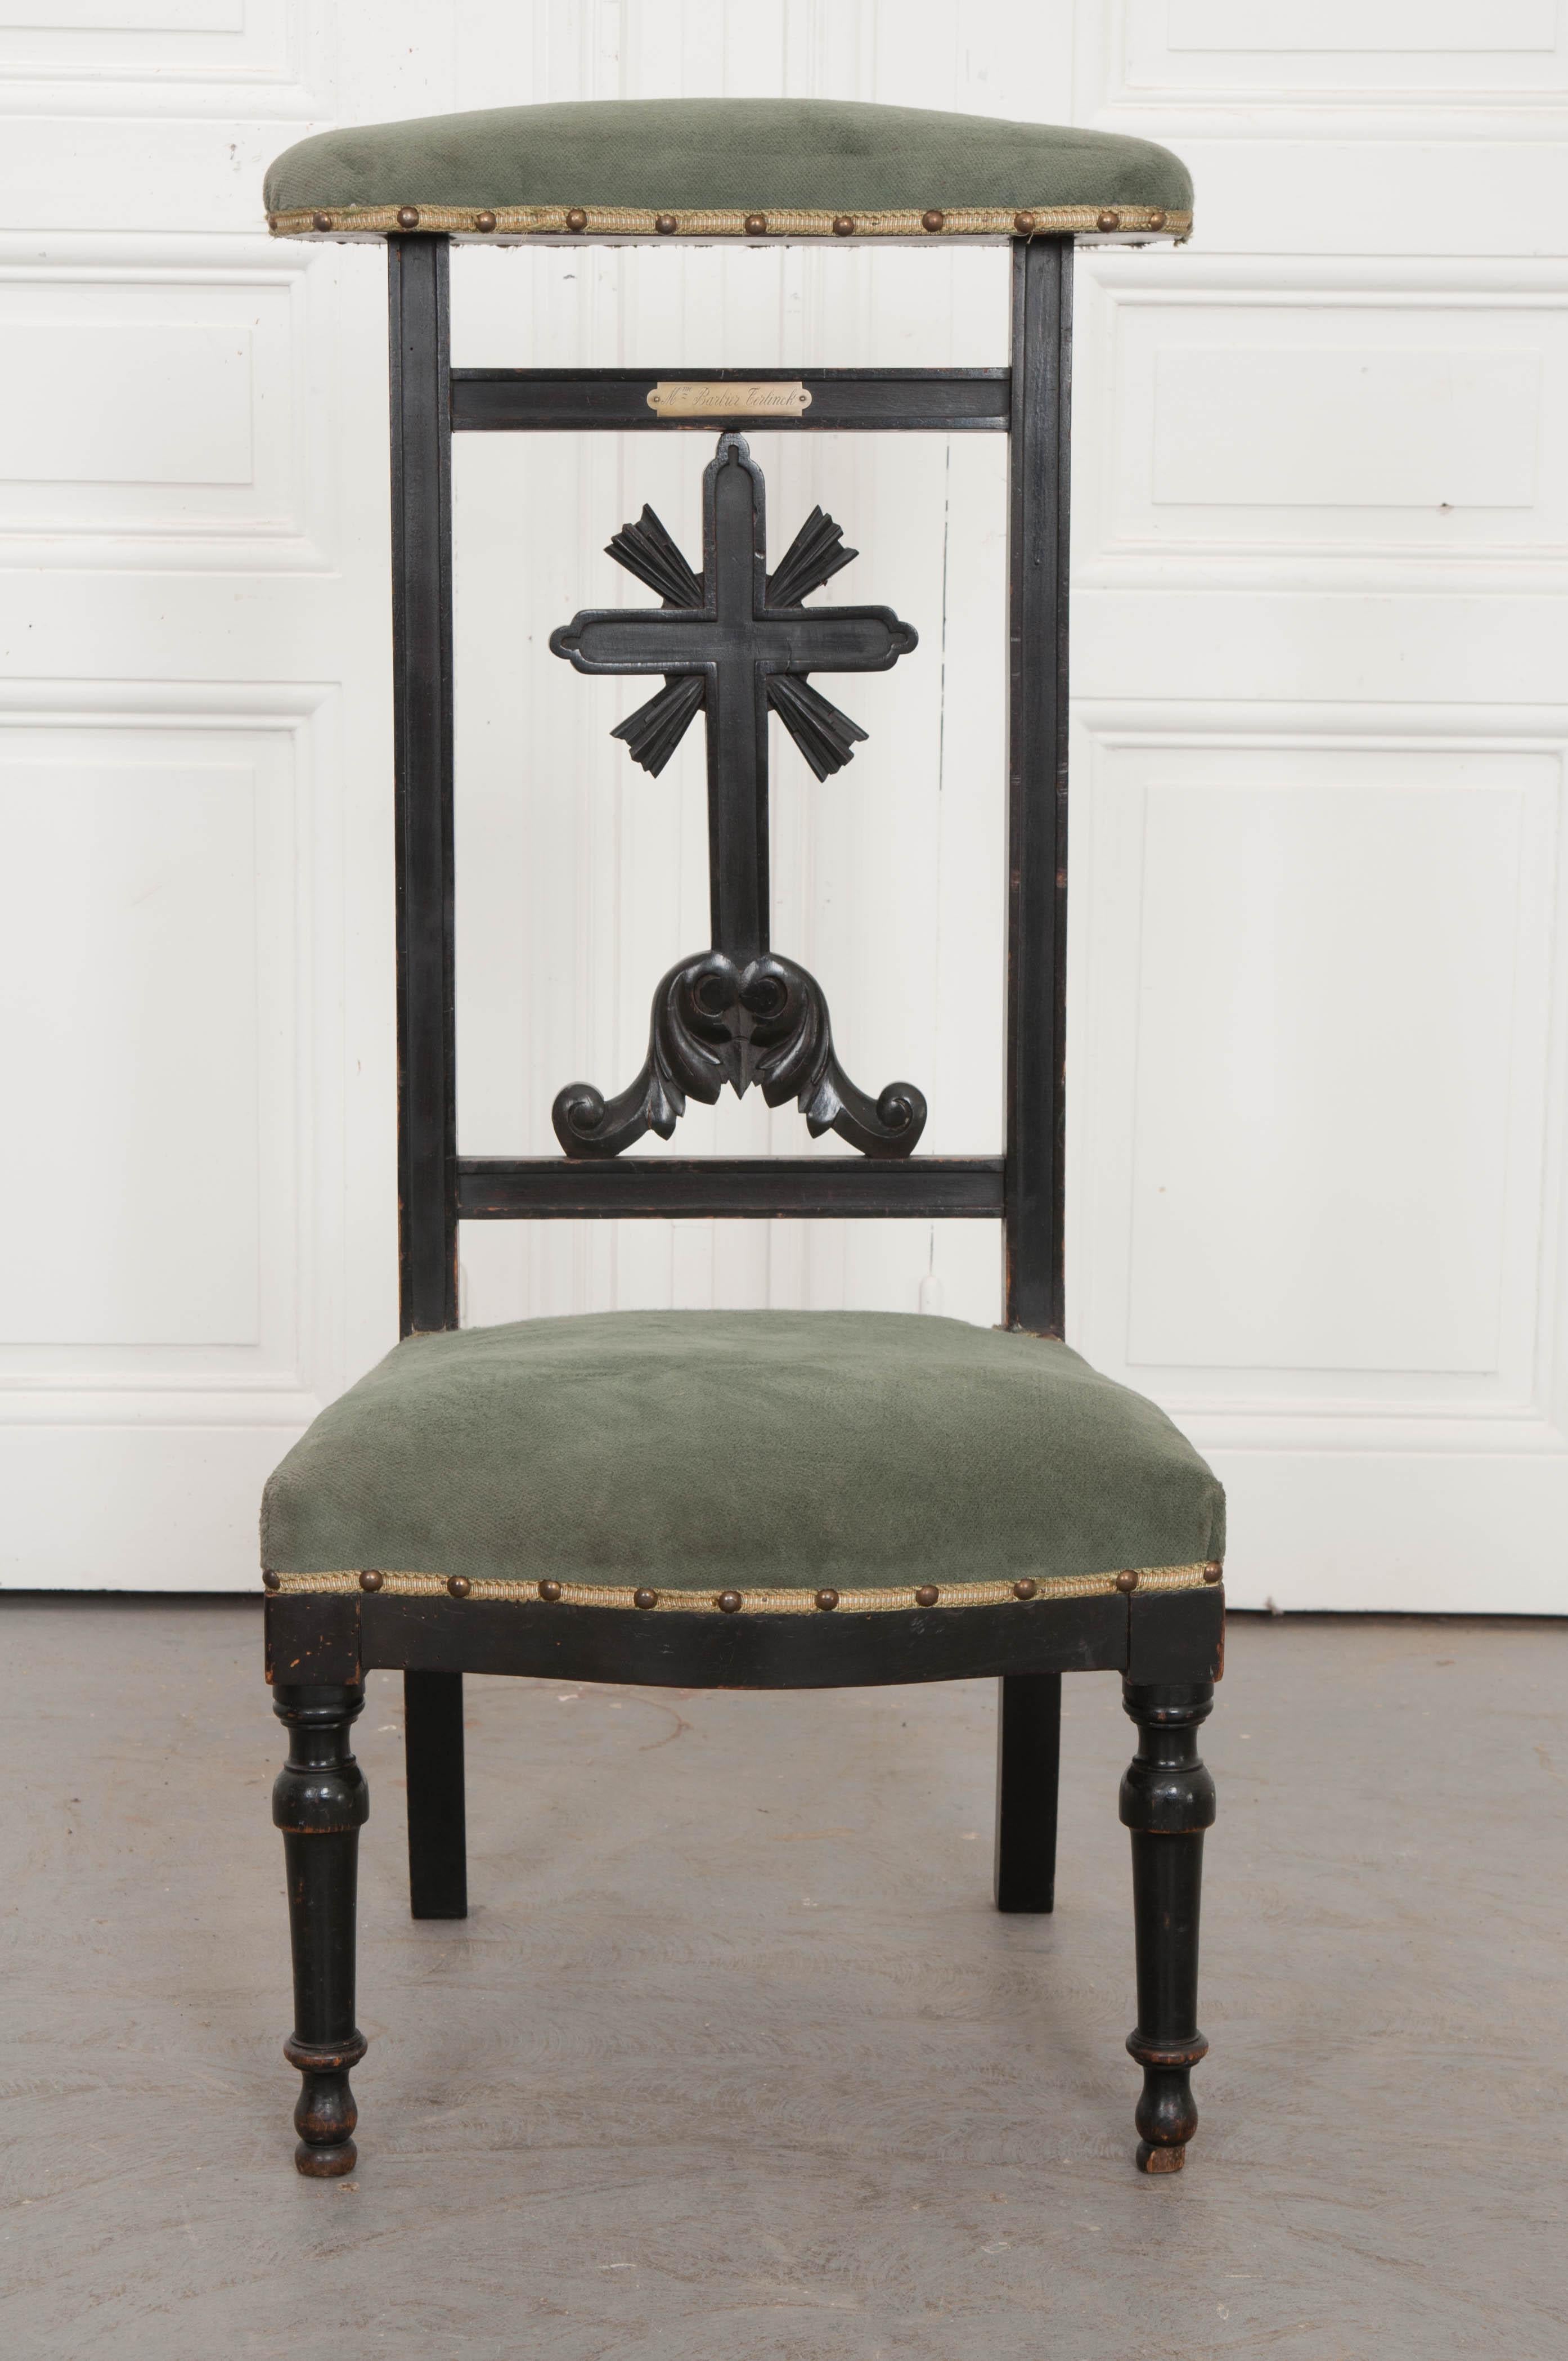 A delightful 19th century prie deux, upholstered in a cadet blue-green velvet fabric. The frame is made of hardwood that has been ebonized. This exceptional finish has become patinated over the decades, exposing some of the hardwood beneath. Below